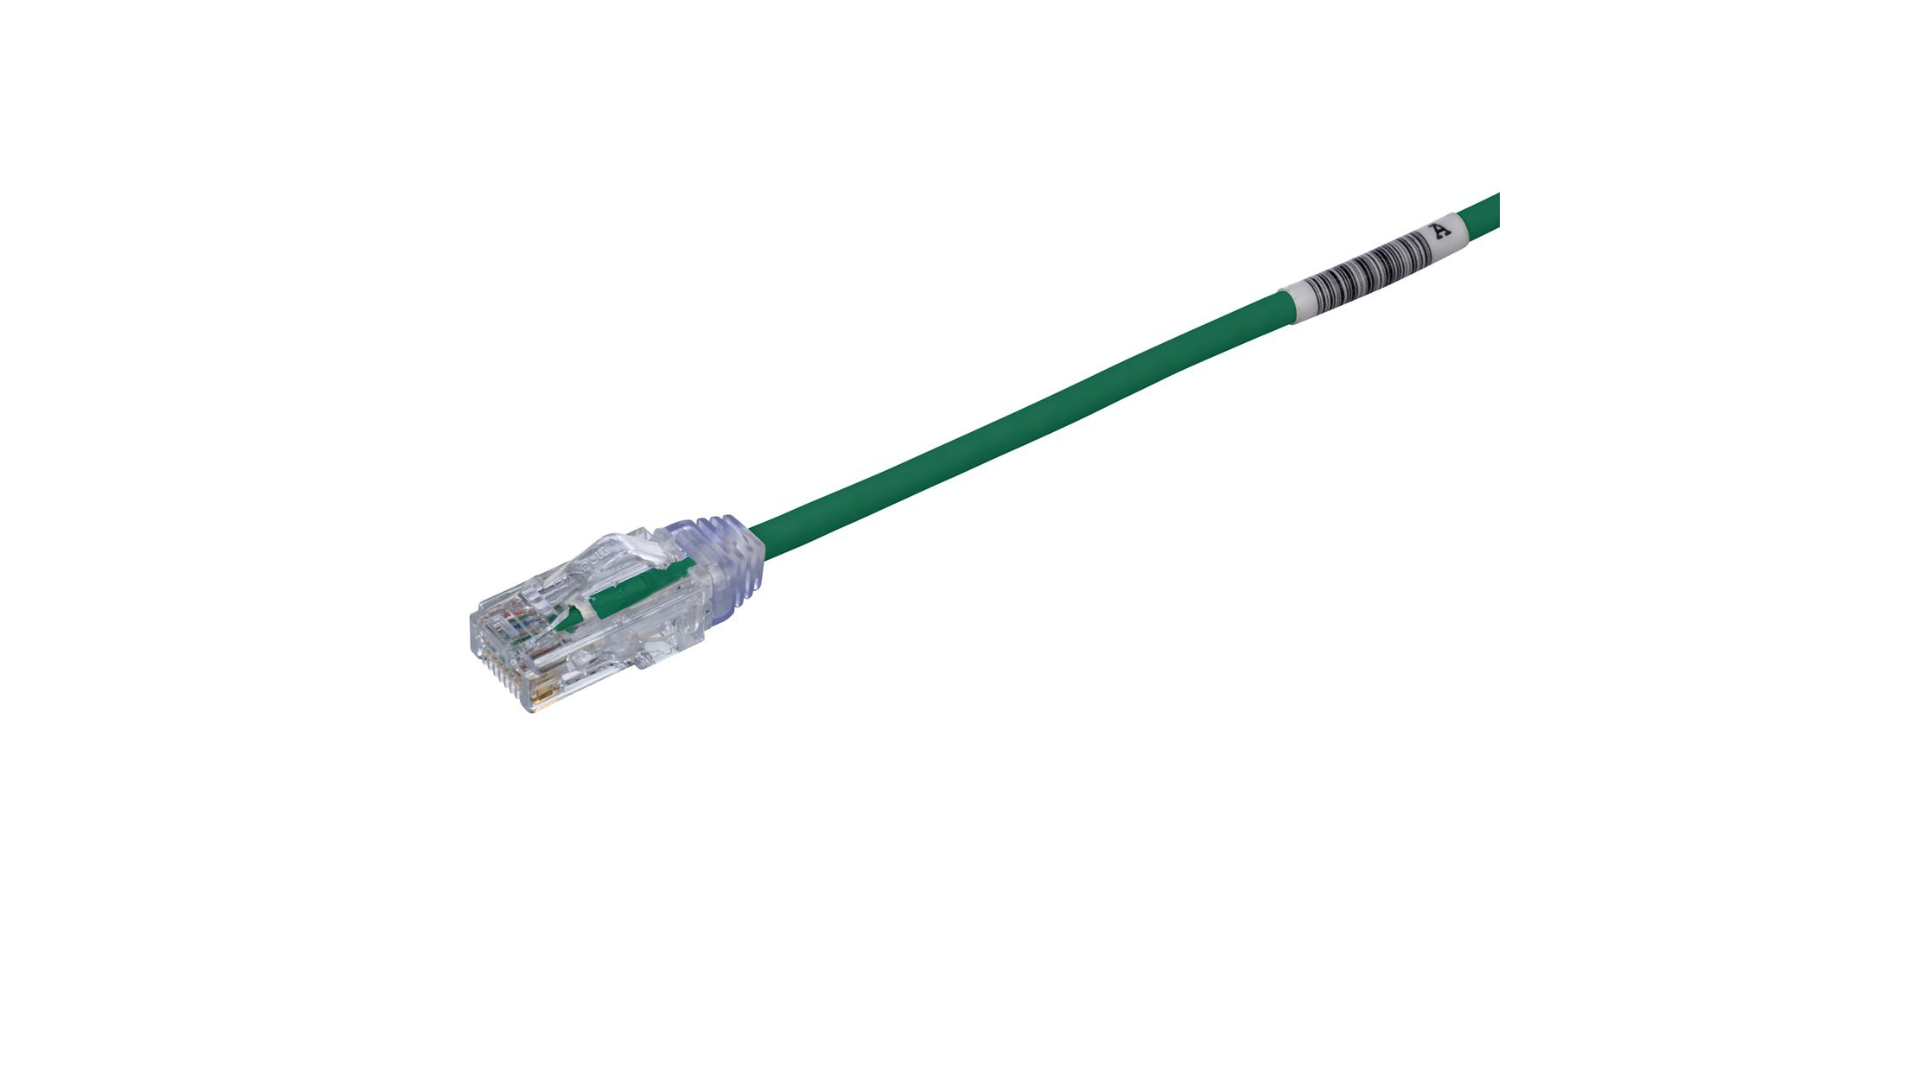 Panduit Copper Patch Cord, Cat 6, AWG 28, Green UTP Cable, 2 m